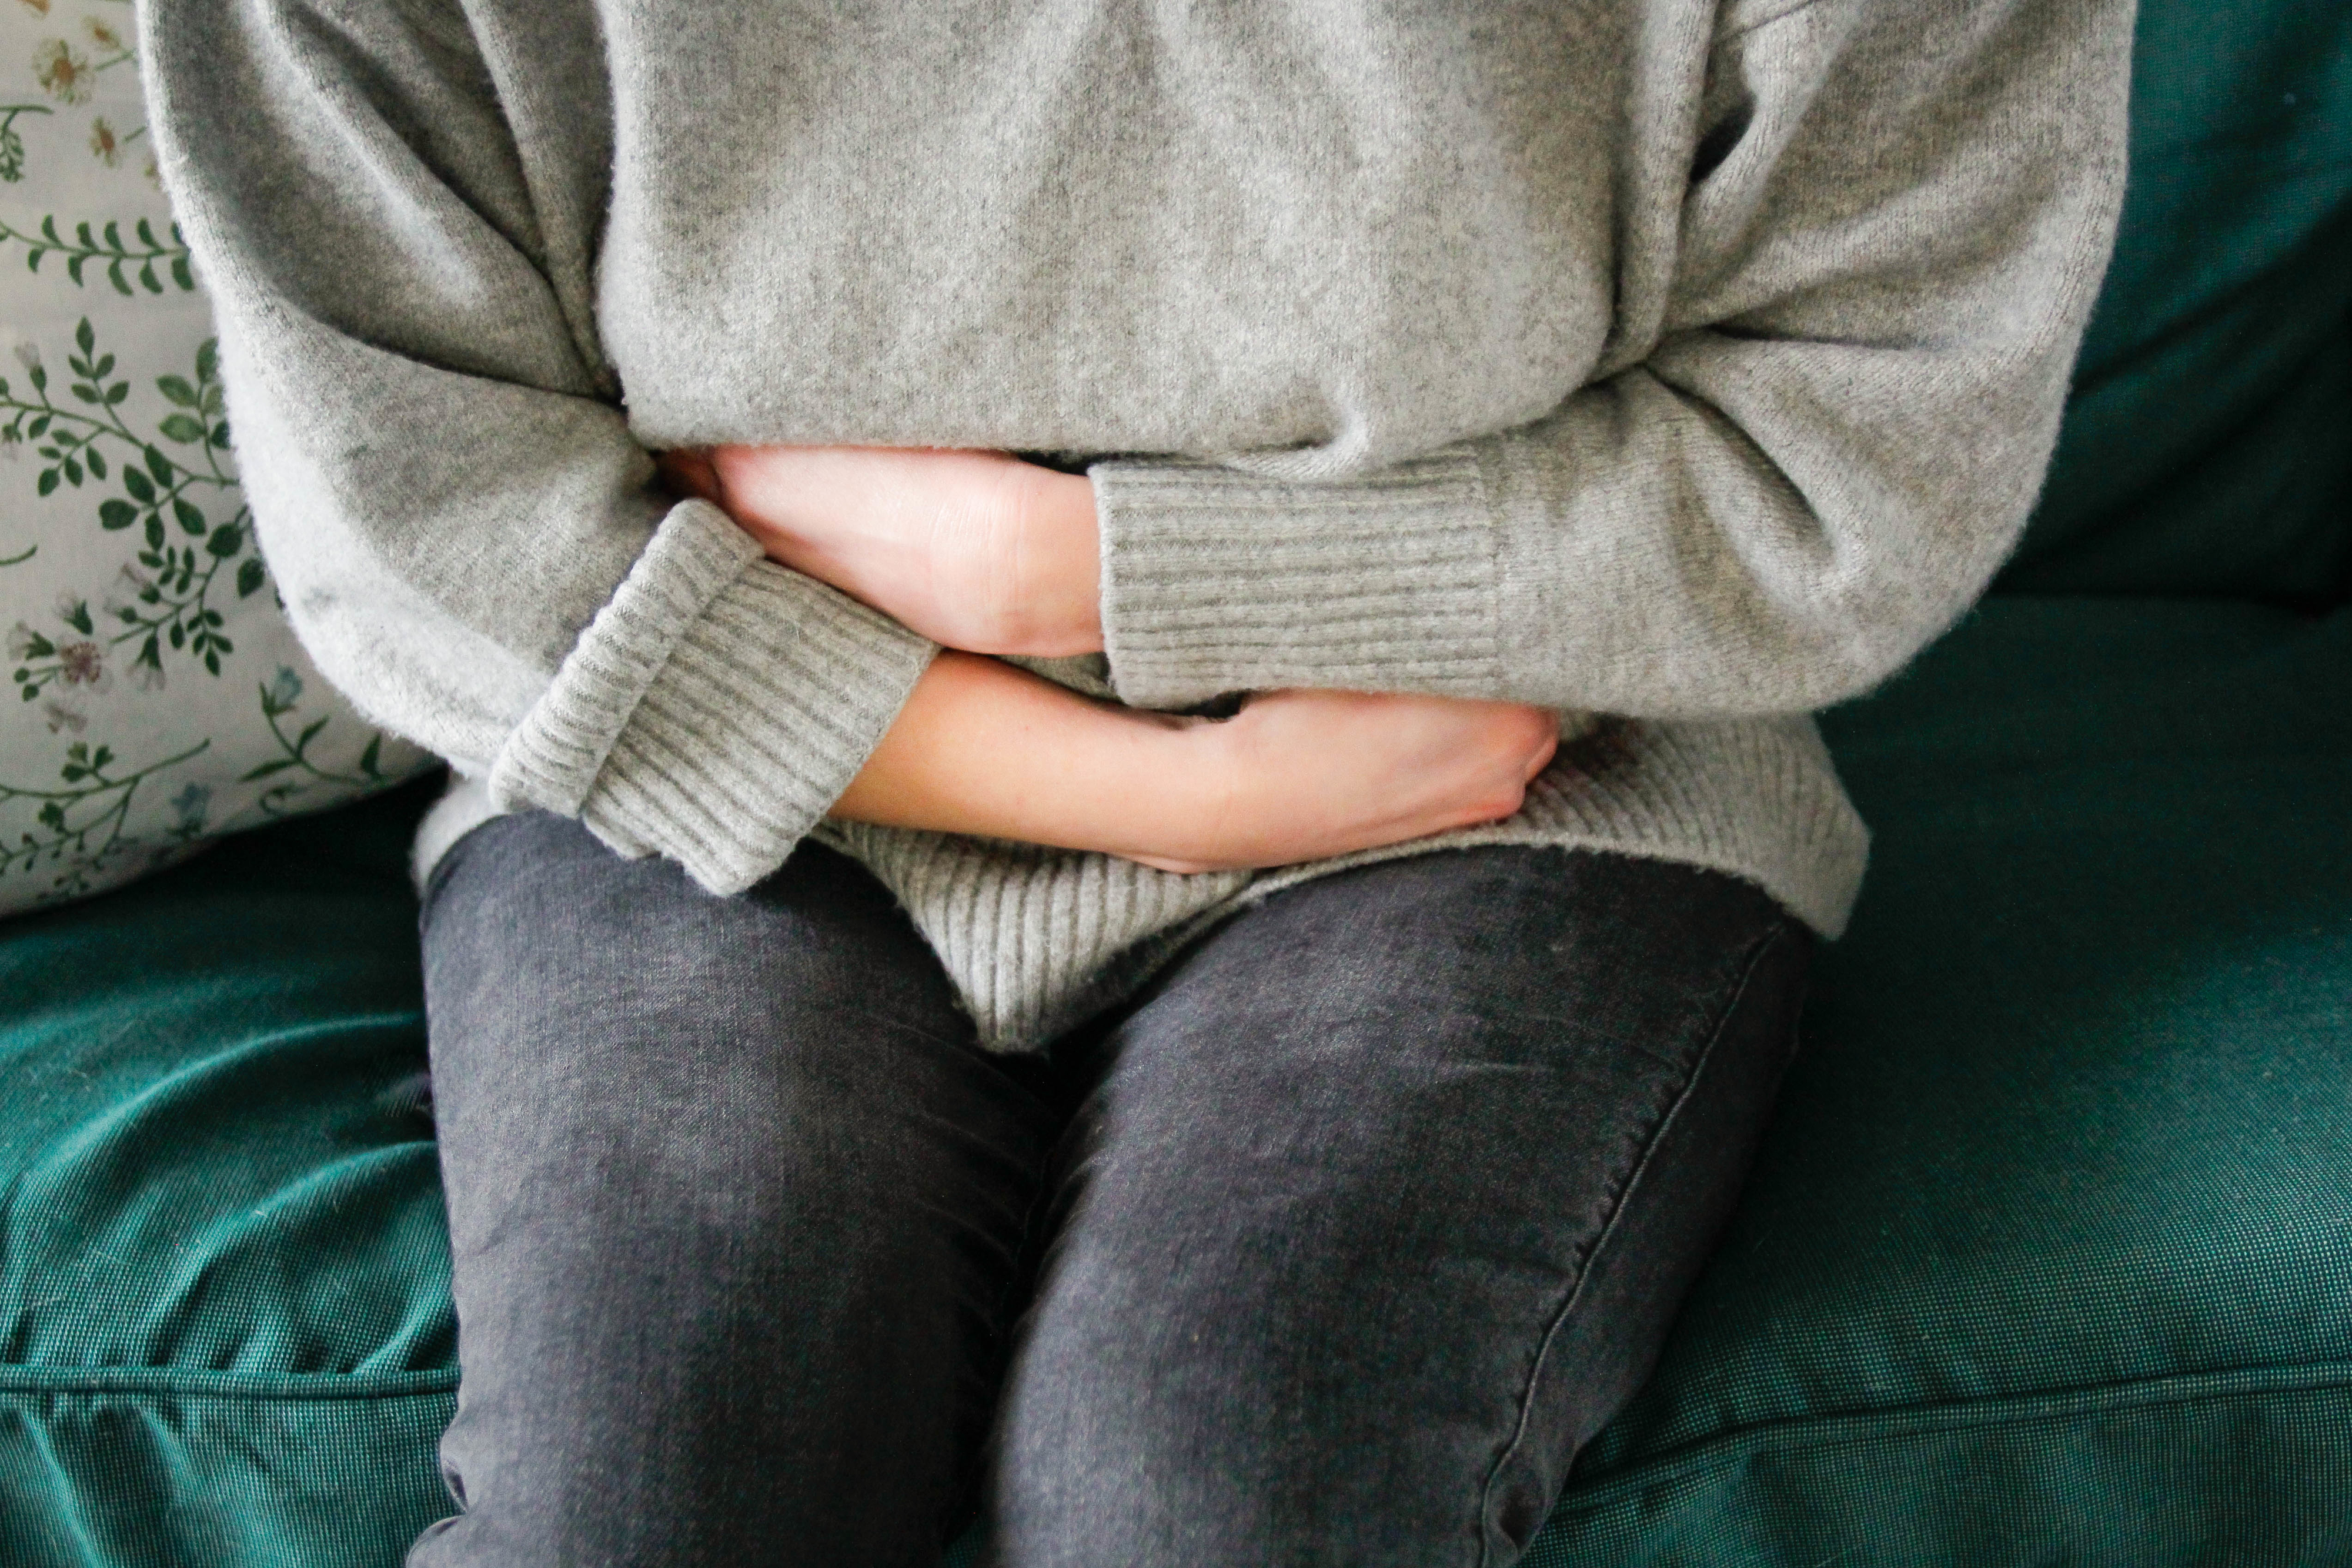 Person sitting with arms wrapped around knees, wearing a sweater and jeans, on a couch